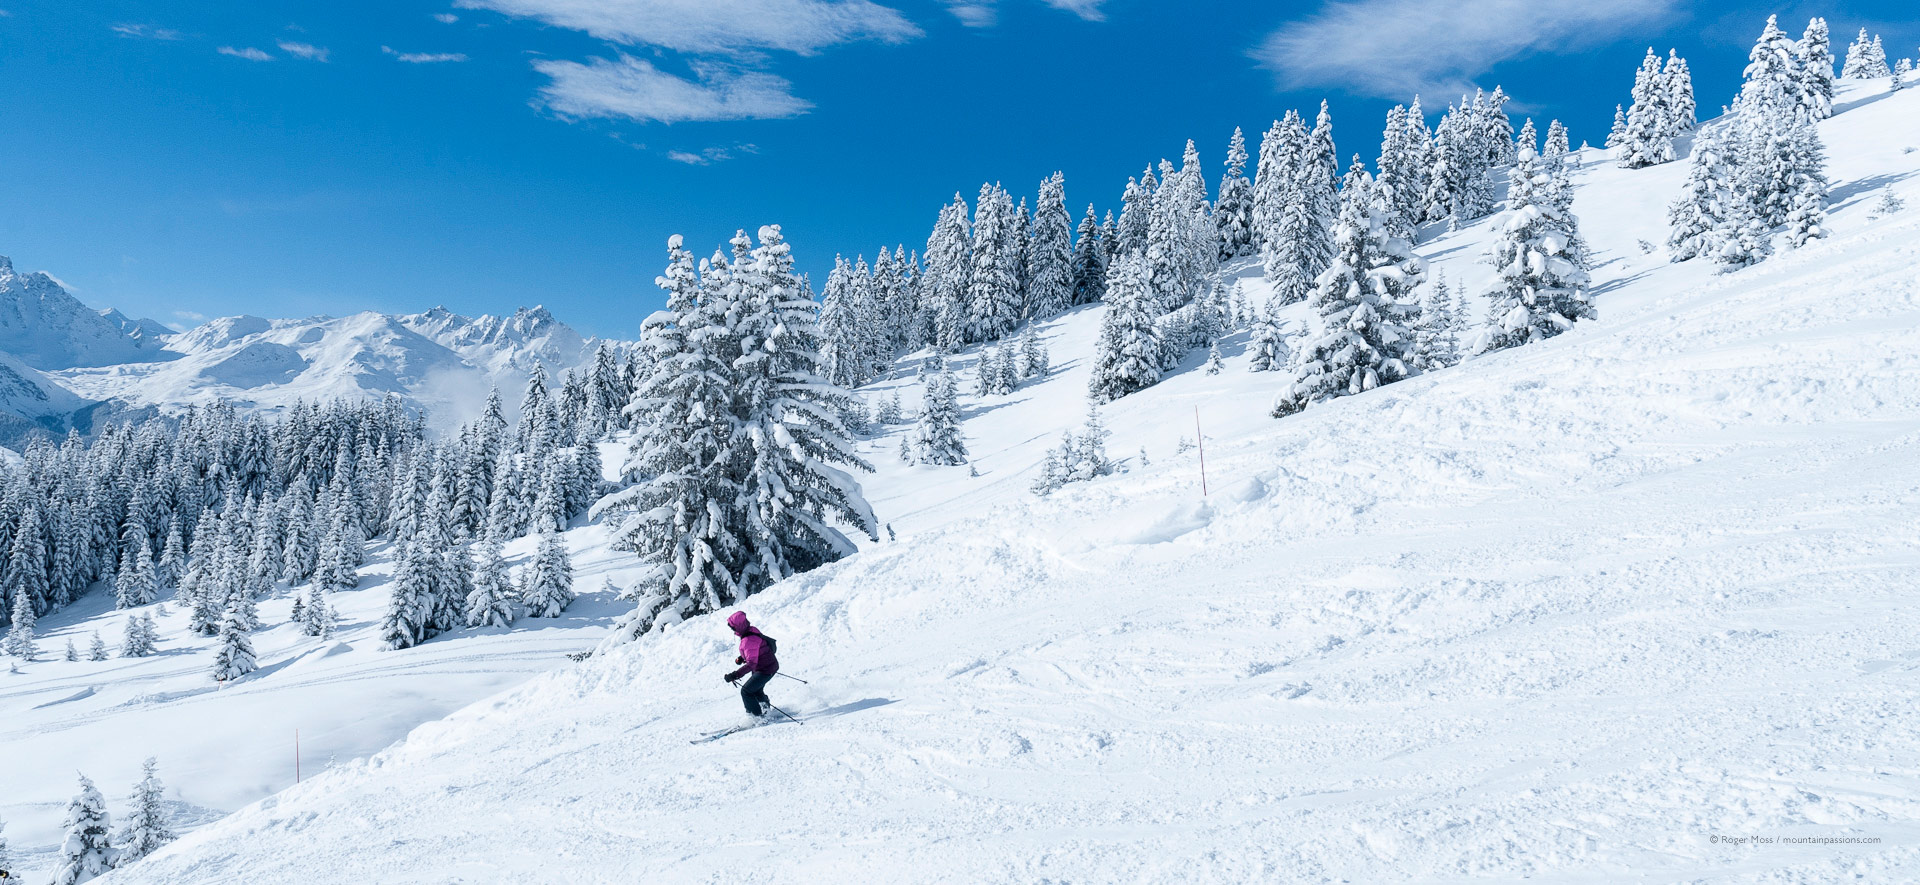 Skier on fresh snow with snow-dusted pine trees.